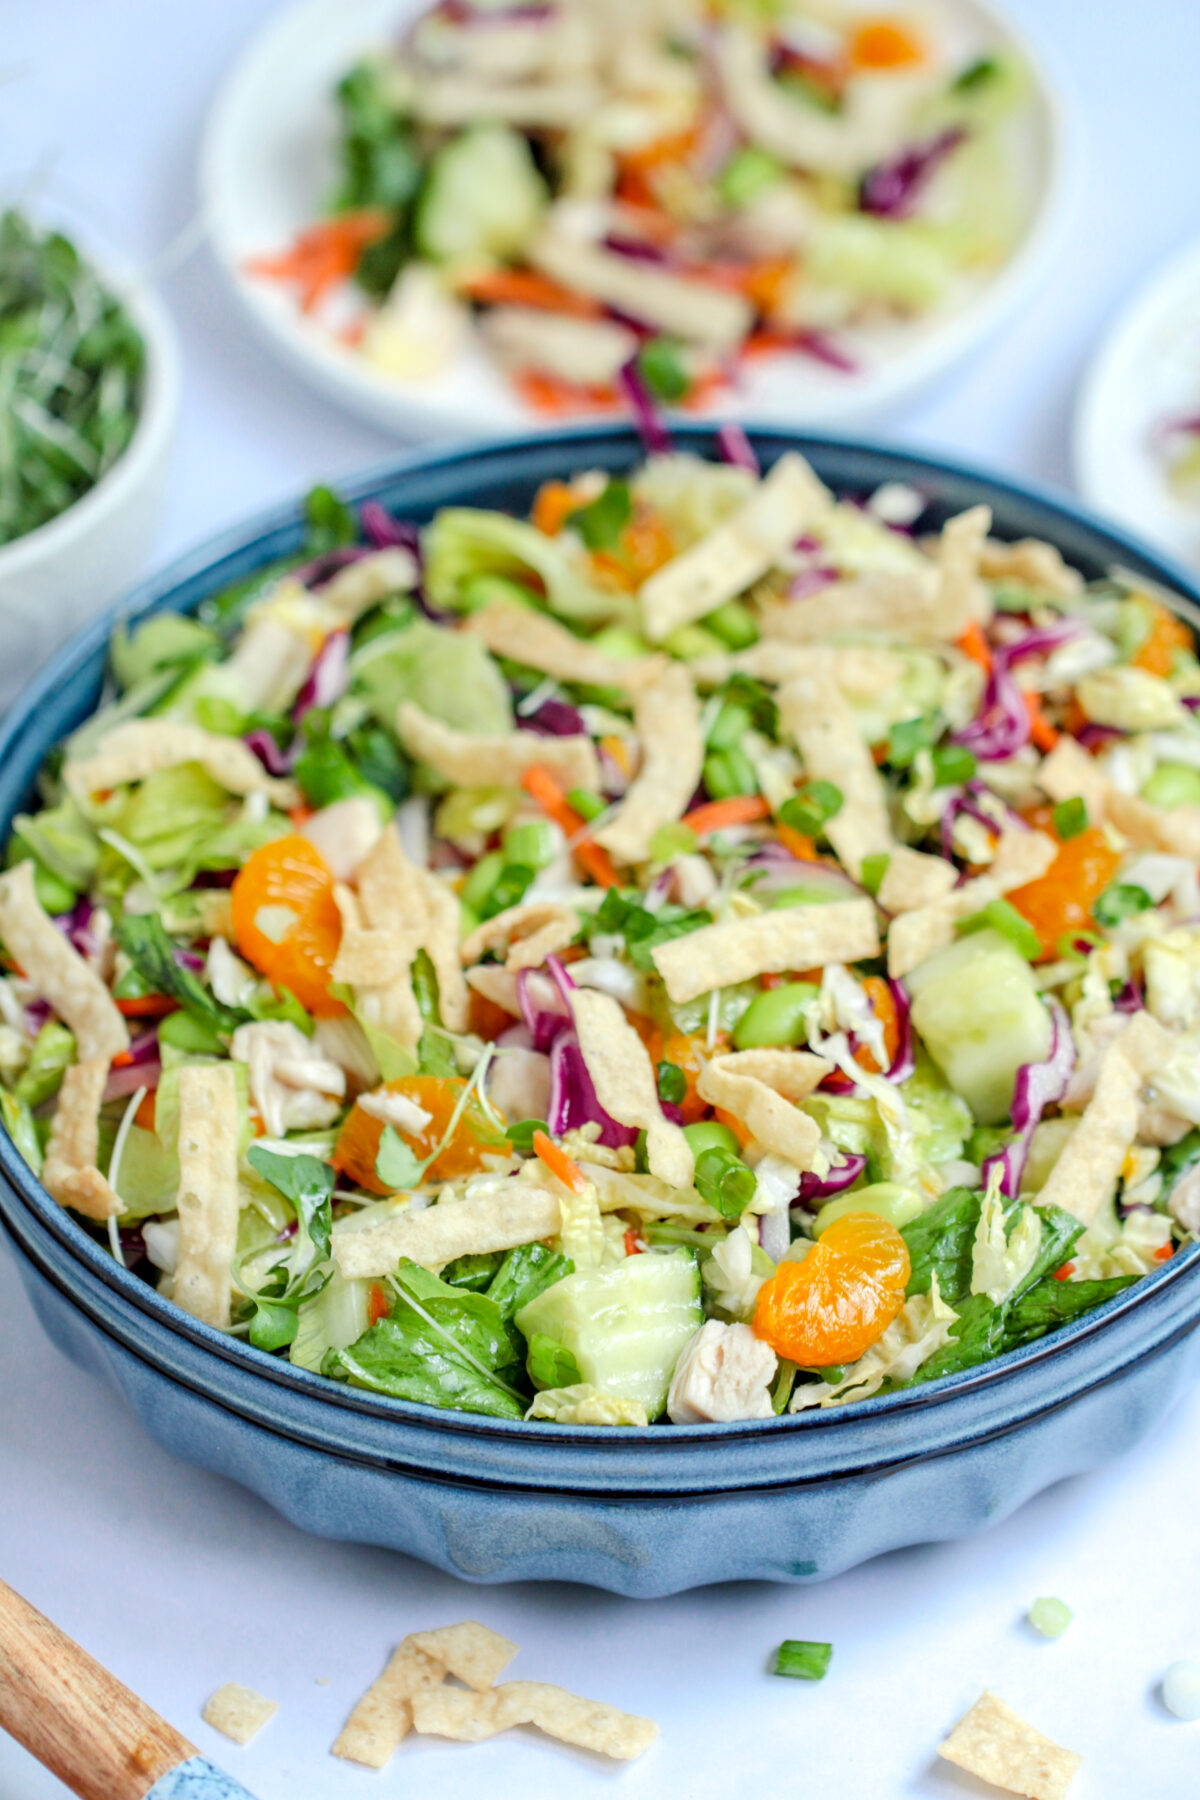 Spice up your salad game with this classic Asian chicken salad recipe; it's easy, delicious, and guaranteed to make dinnertime more exciting!